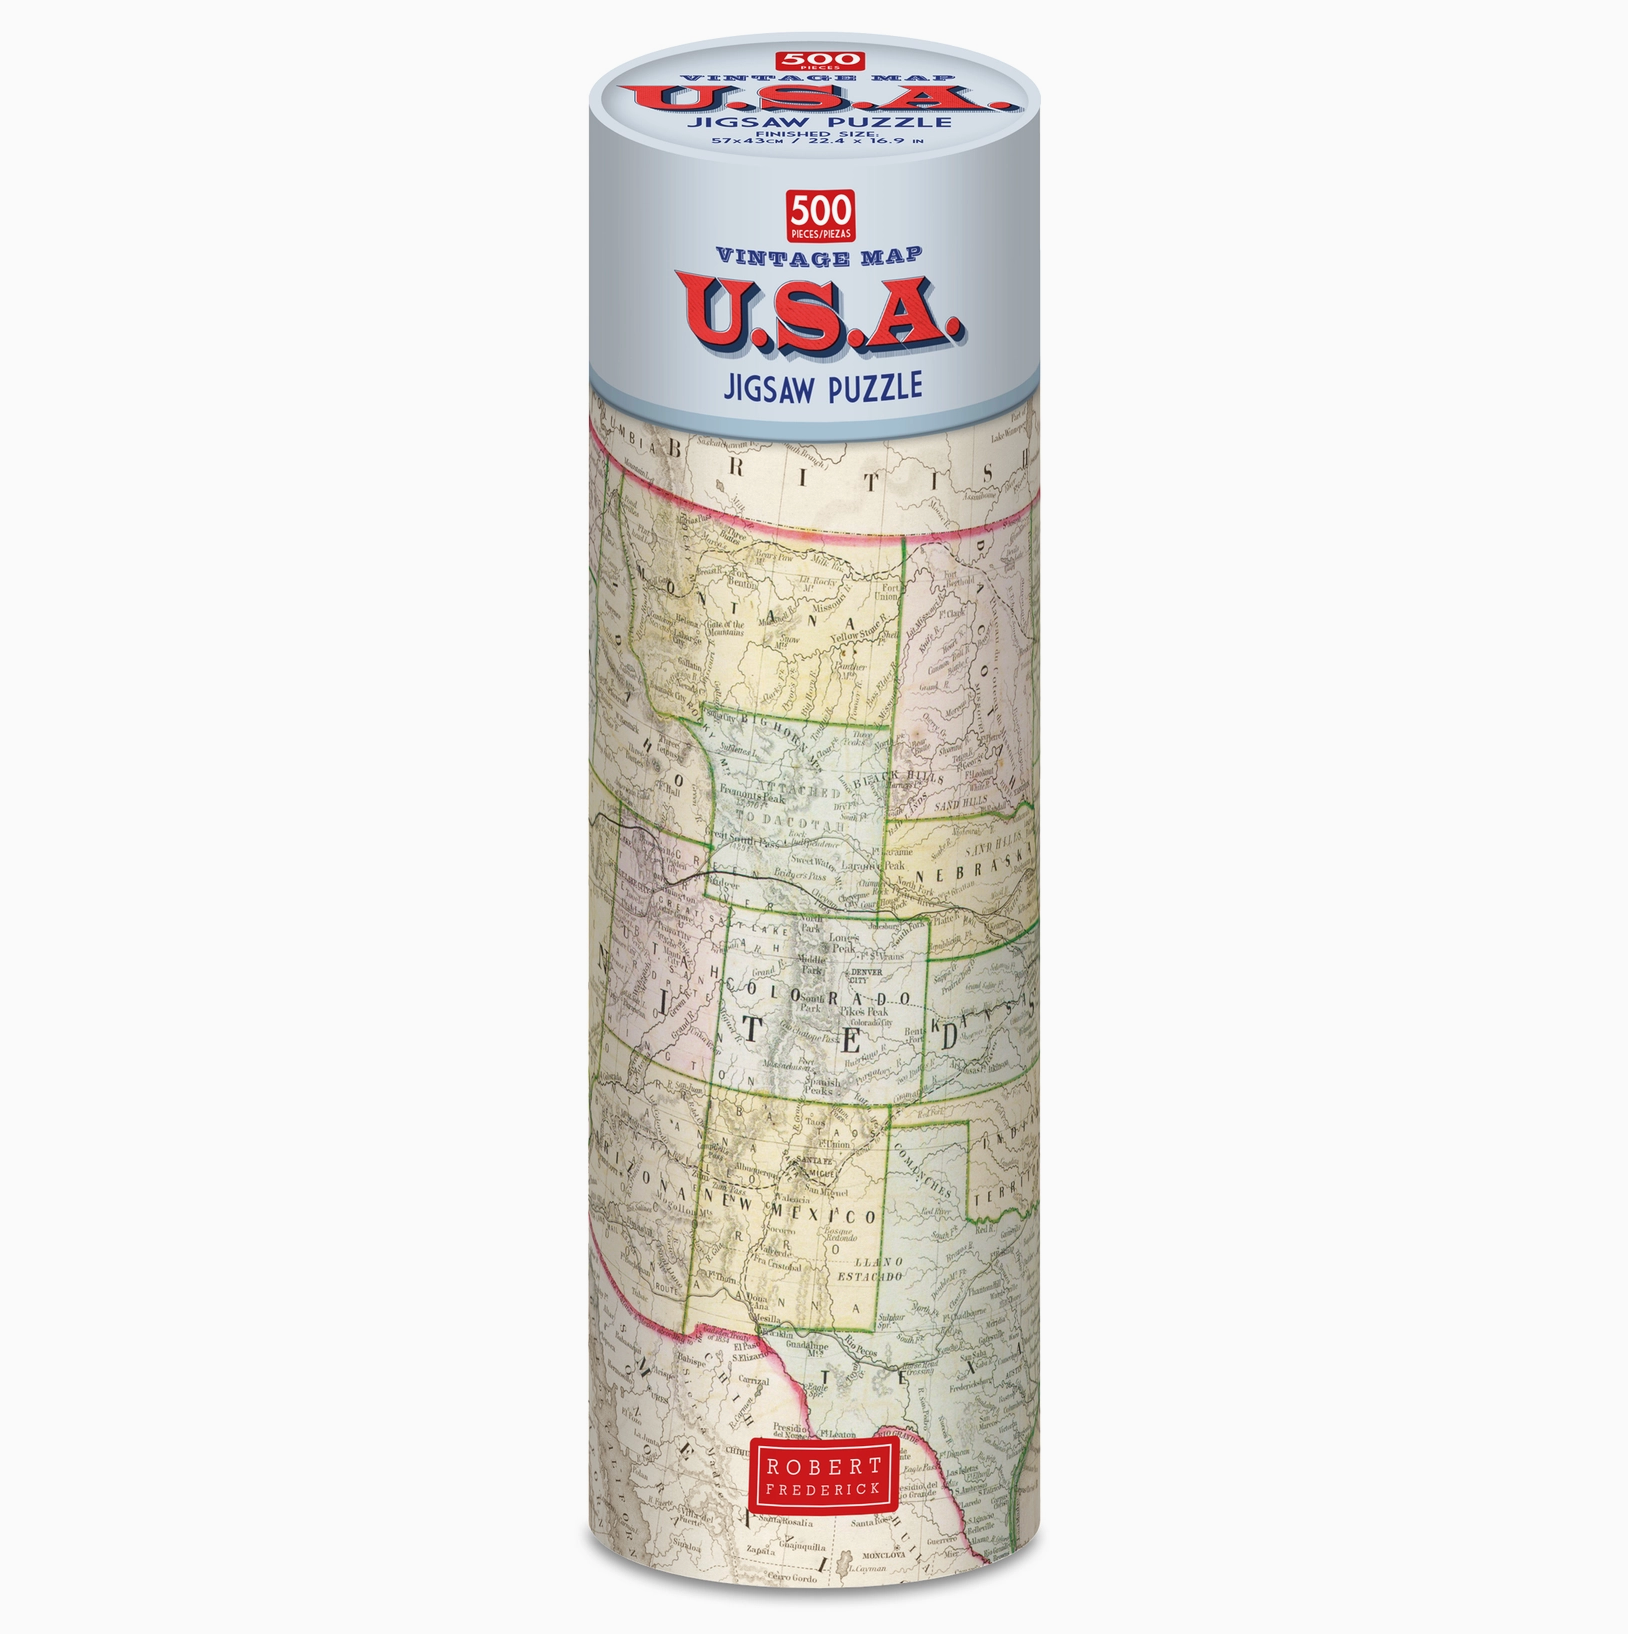 USA Vintage Map 500 Piece Jigsaw Puzzle in a Tube